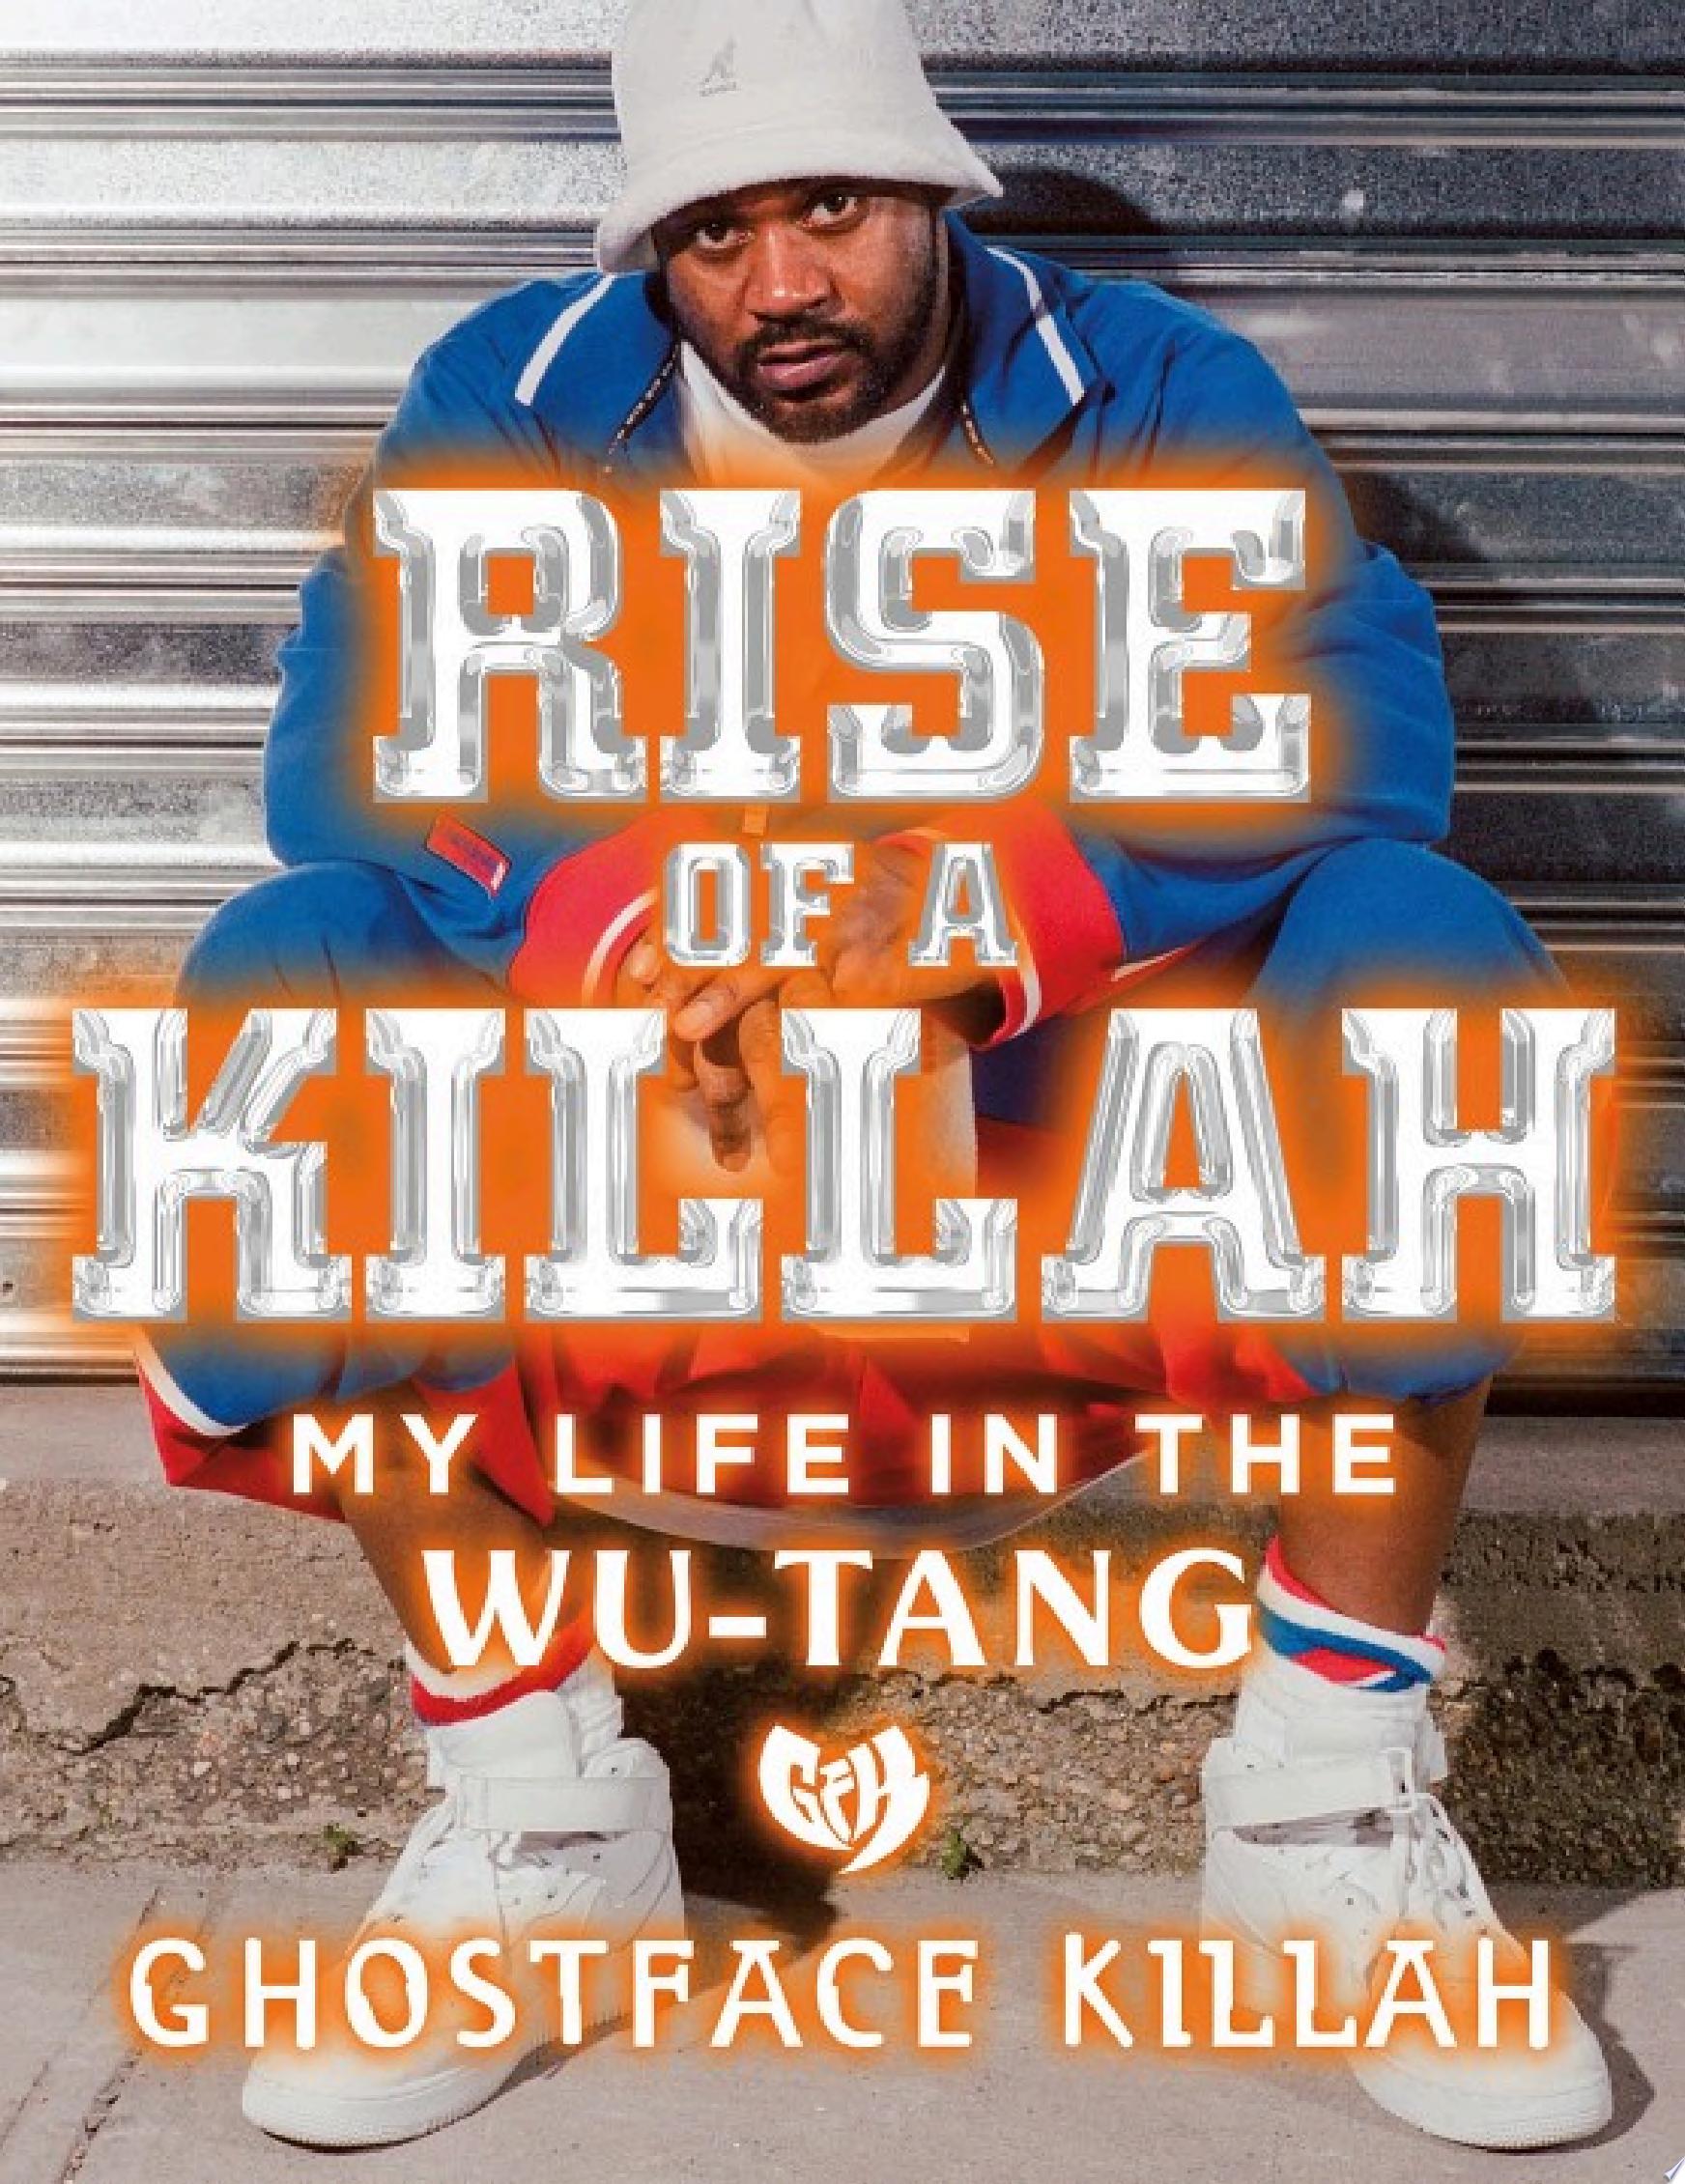 Image for "Rise of a Killah"